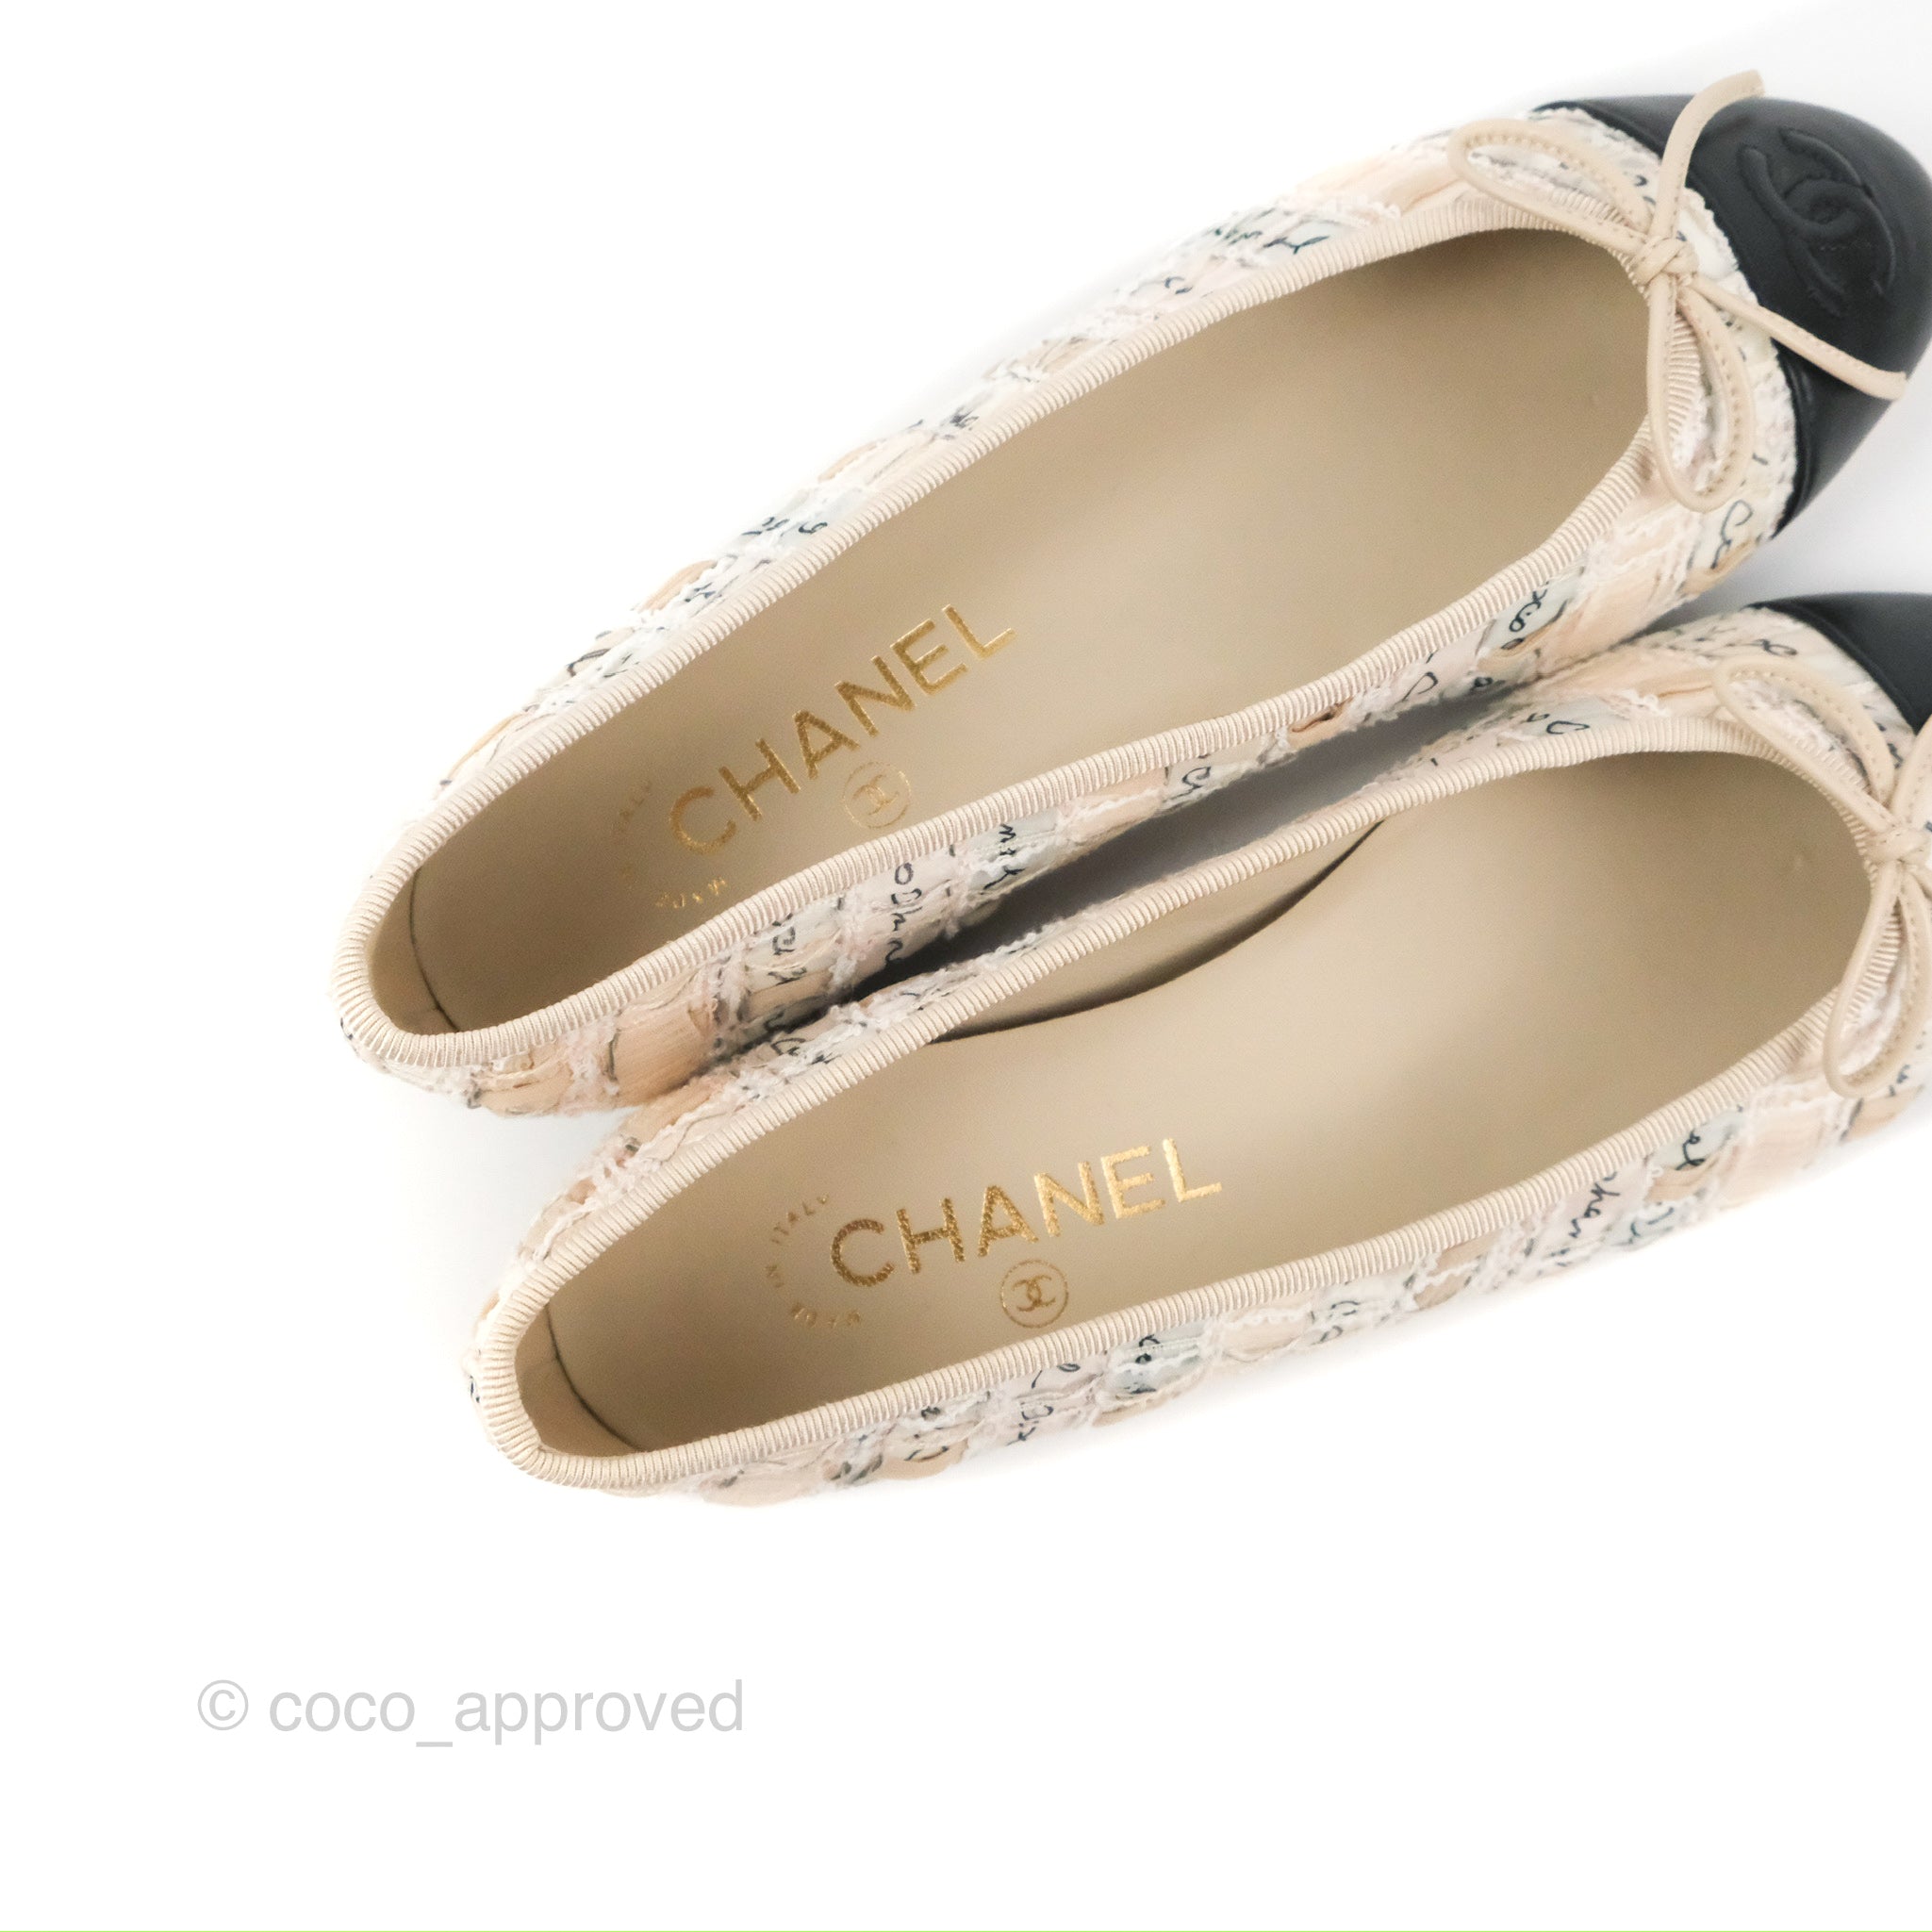 Chanel Ballerina Flats Light Pink/Black Fabric Size 36.5 – Coco Approved  Studio